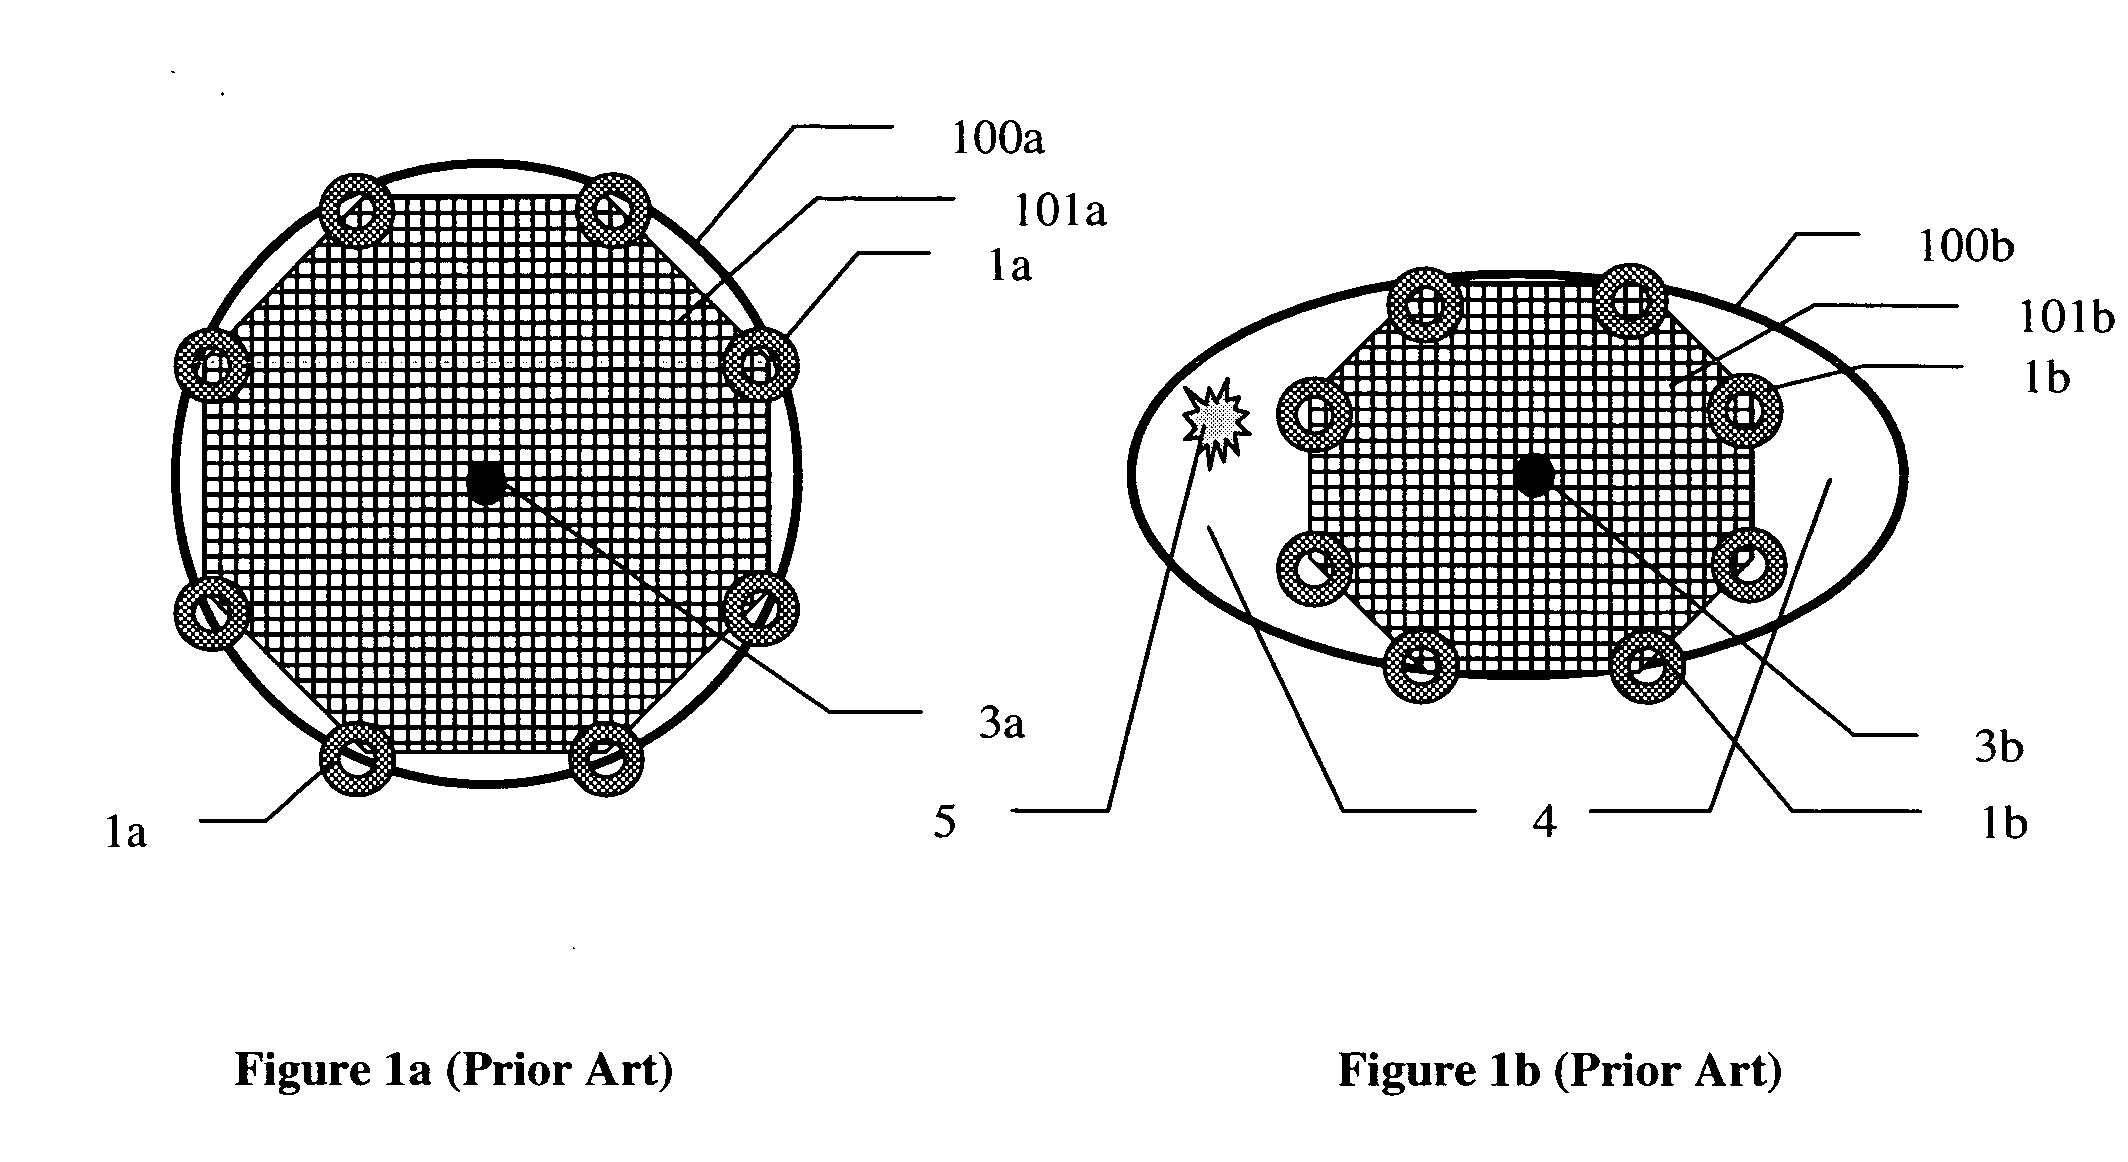 Distal protection device with improved wall apposition